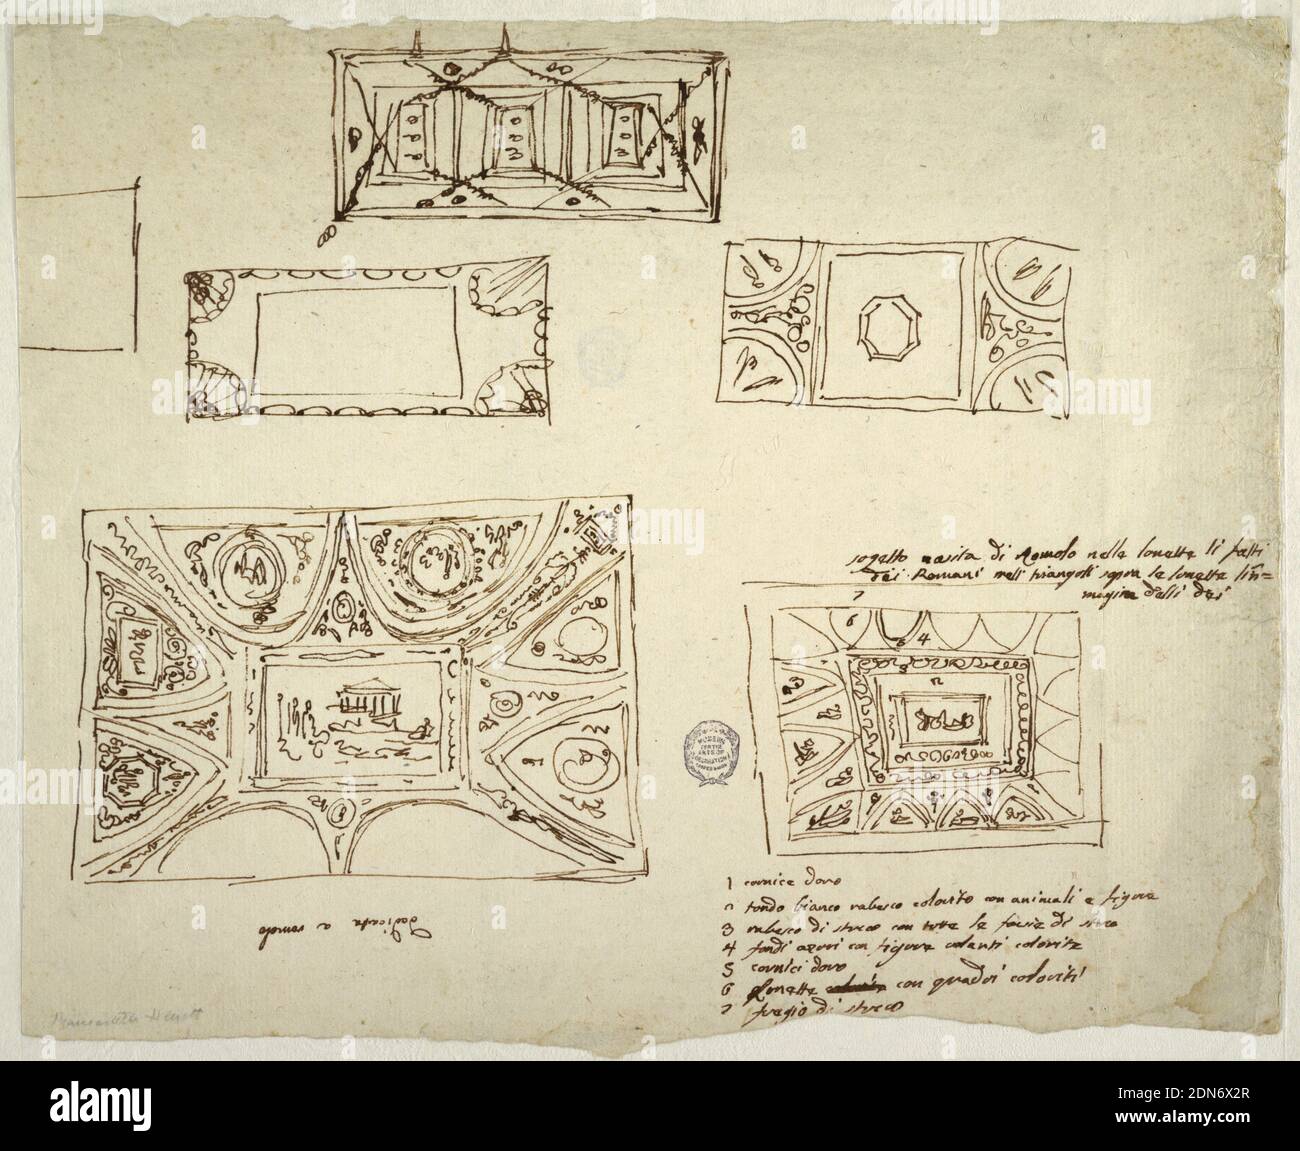 Five Ceiling Schemes, Felice Giani, Italian, 1758–1823, Pen and brown ink on laid paper, Top: Oblong ceiling with three sections, framed by bands; entire panels of sections held by pair of crossed boughs. Second row: at left, oblong ceiling with shell motifs in corners, connected by rows of arches. Inner oblong undecorated. At right, oblong ceiling with inner square into which octagon inscribed. Segments with figures shown in corners. Bottom left, oblong ceiling with richly decorated imaginary vaults and central oblong with landscape. Alternative suggestions made for schemes of decorations Stock Photo